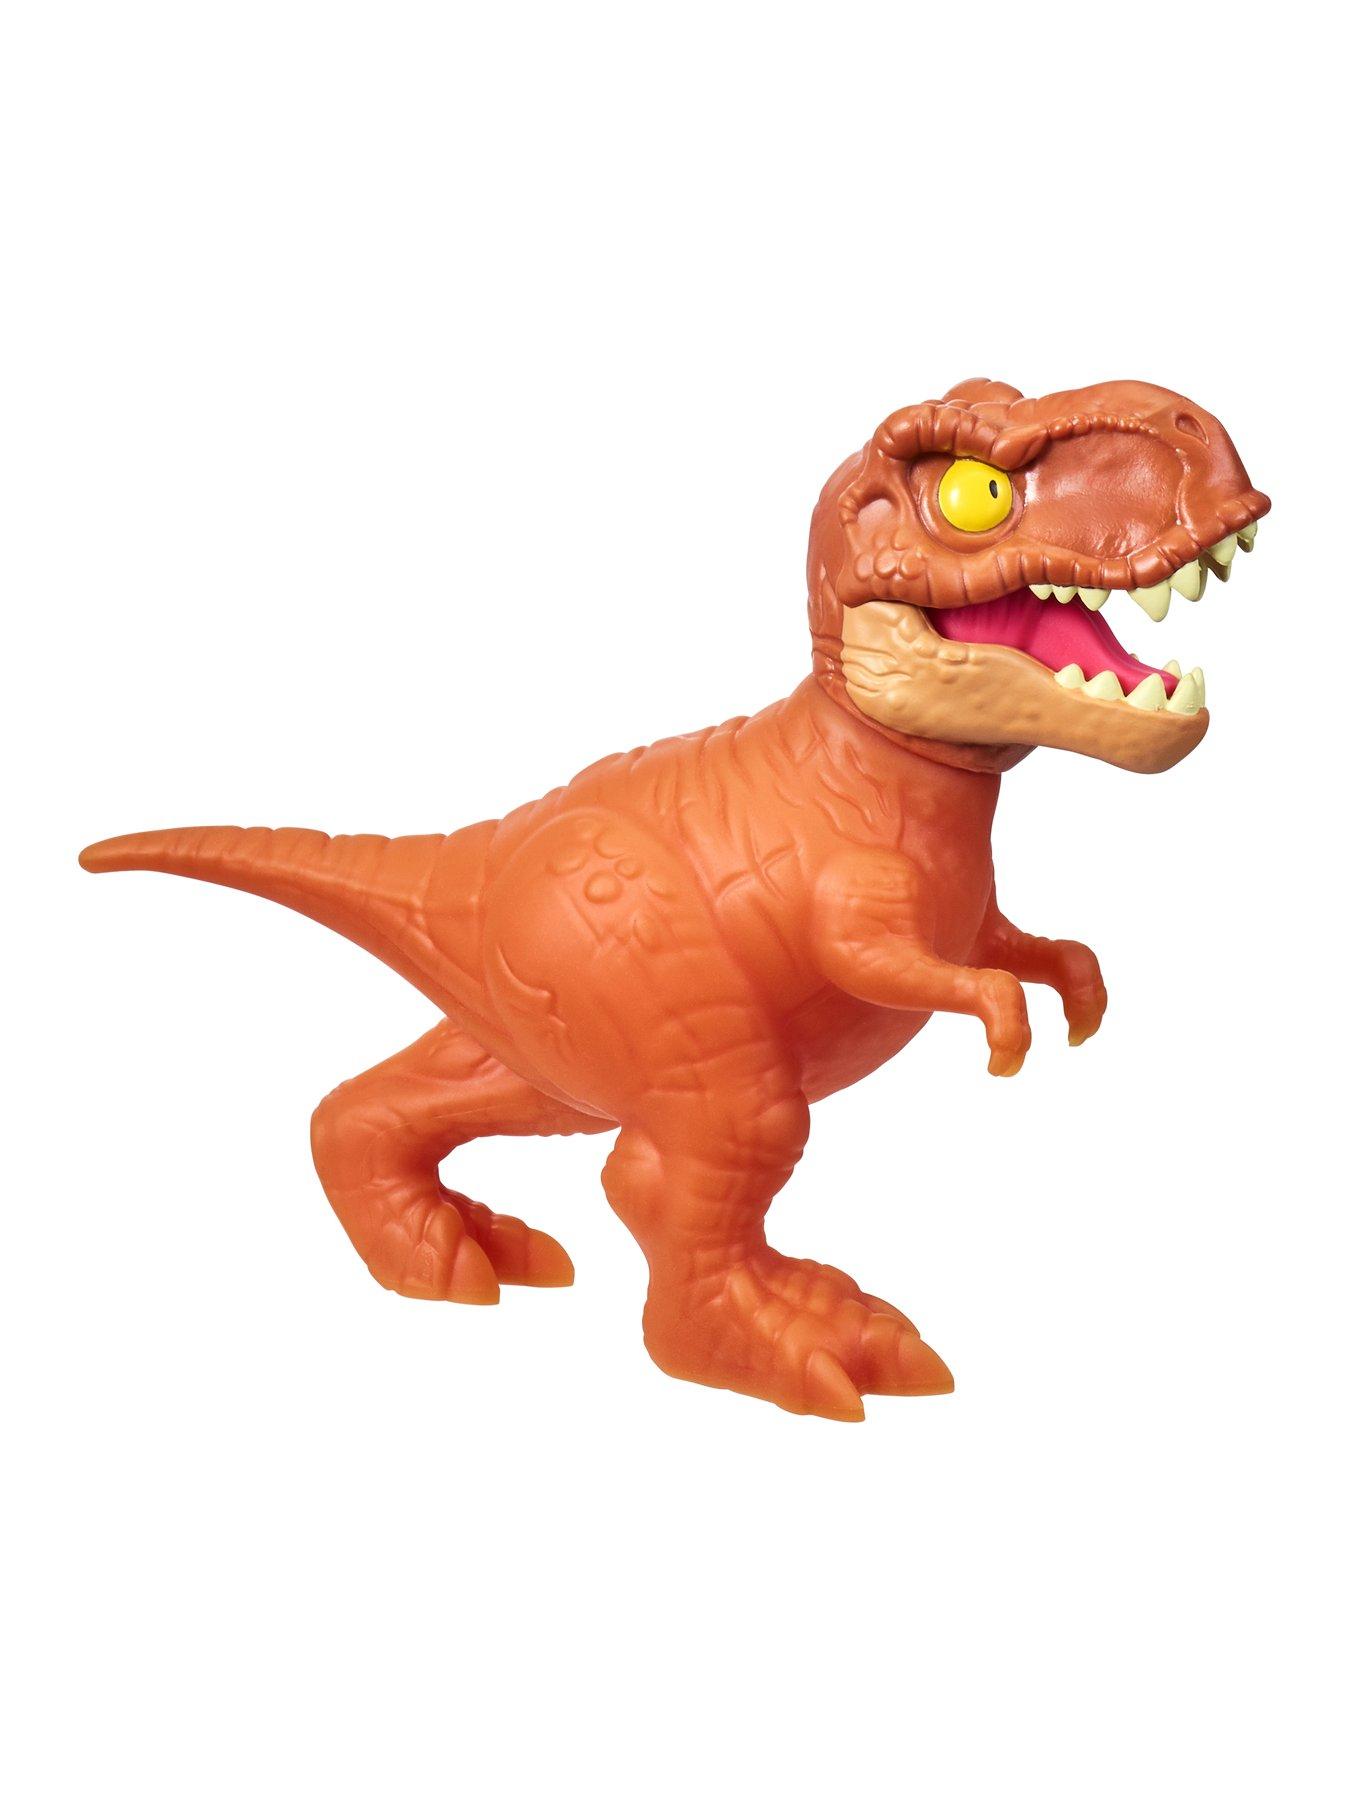  TOMY Games, Jurassic World Pop Up T-Rex, Dinosaur Game for  Kids, Family Game for Ages 4+ : Toys & Games